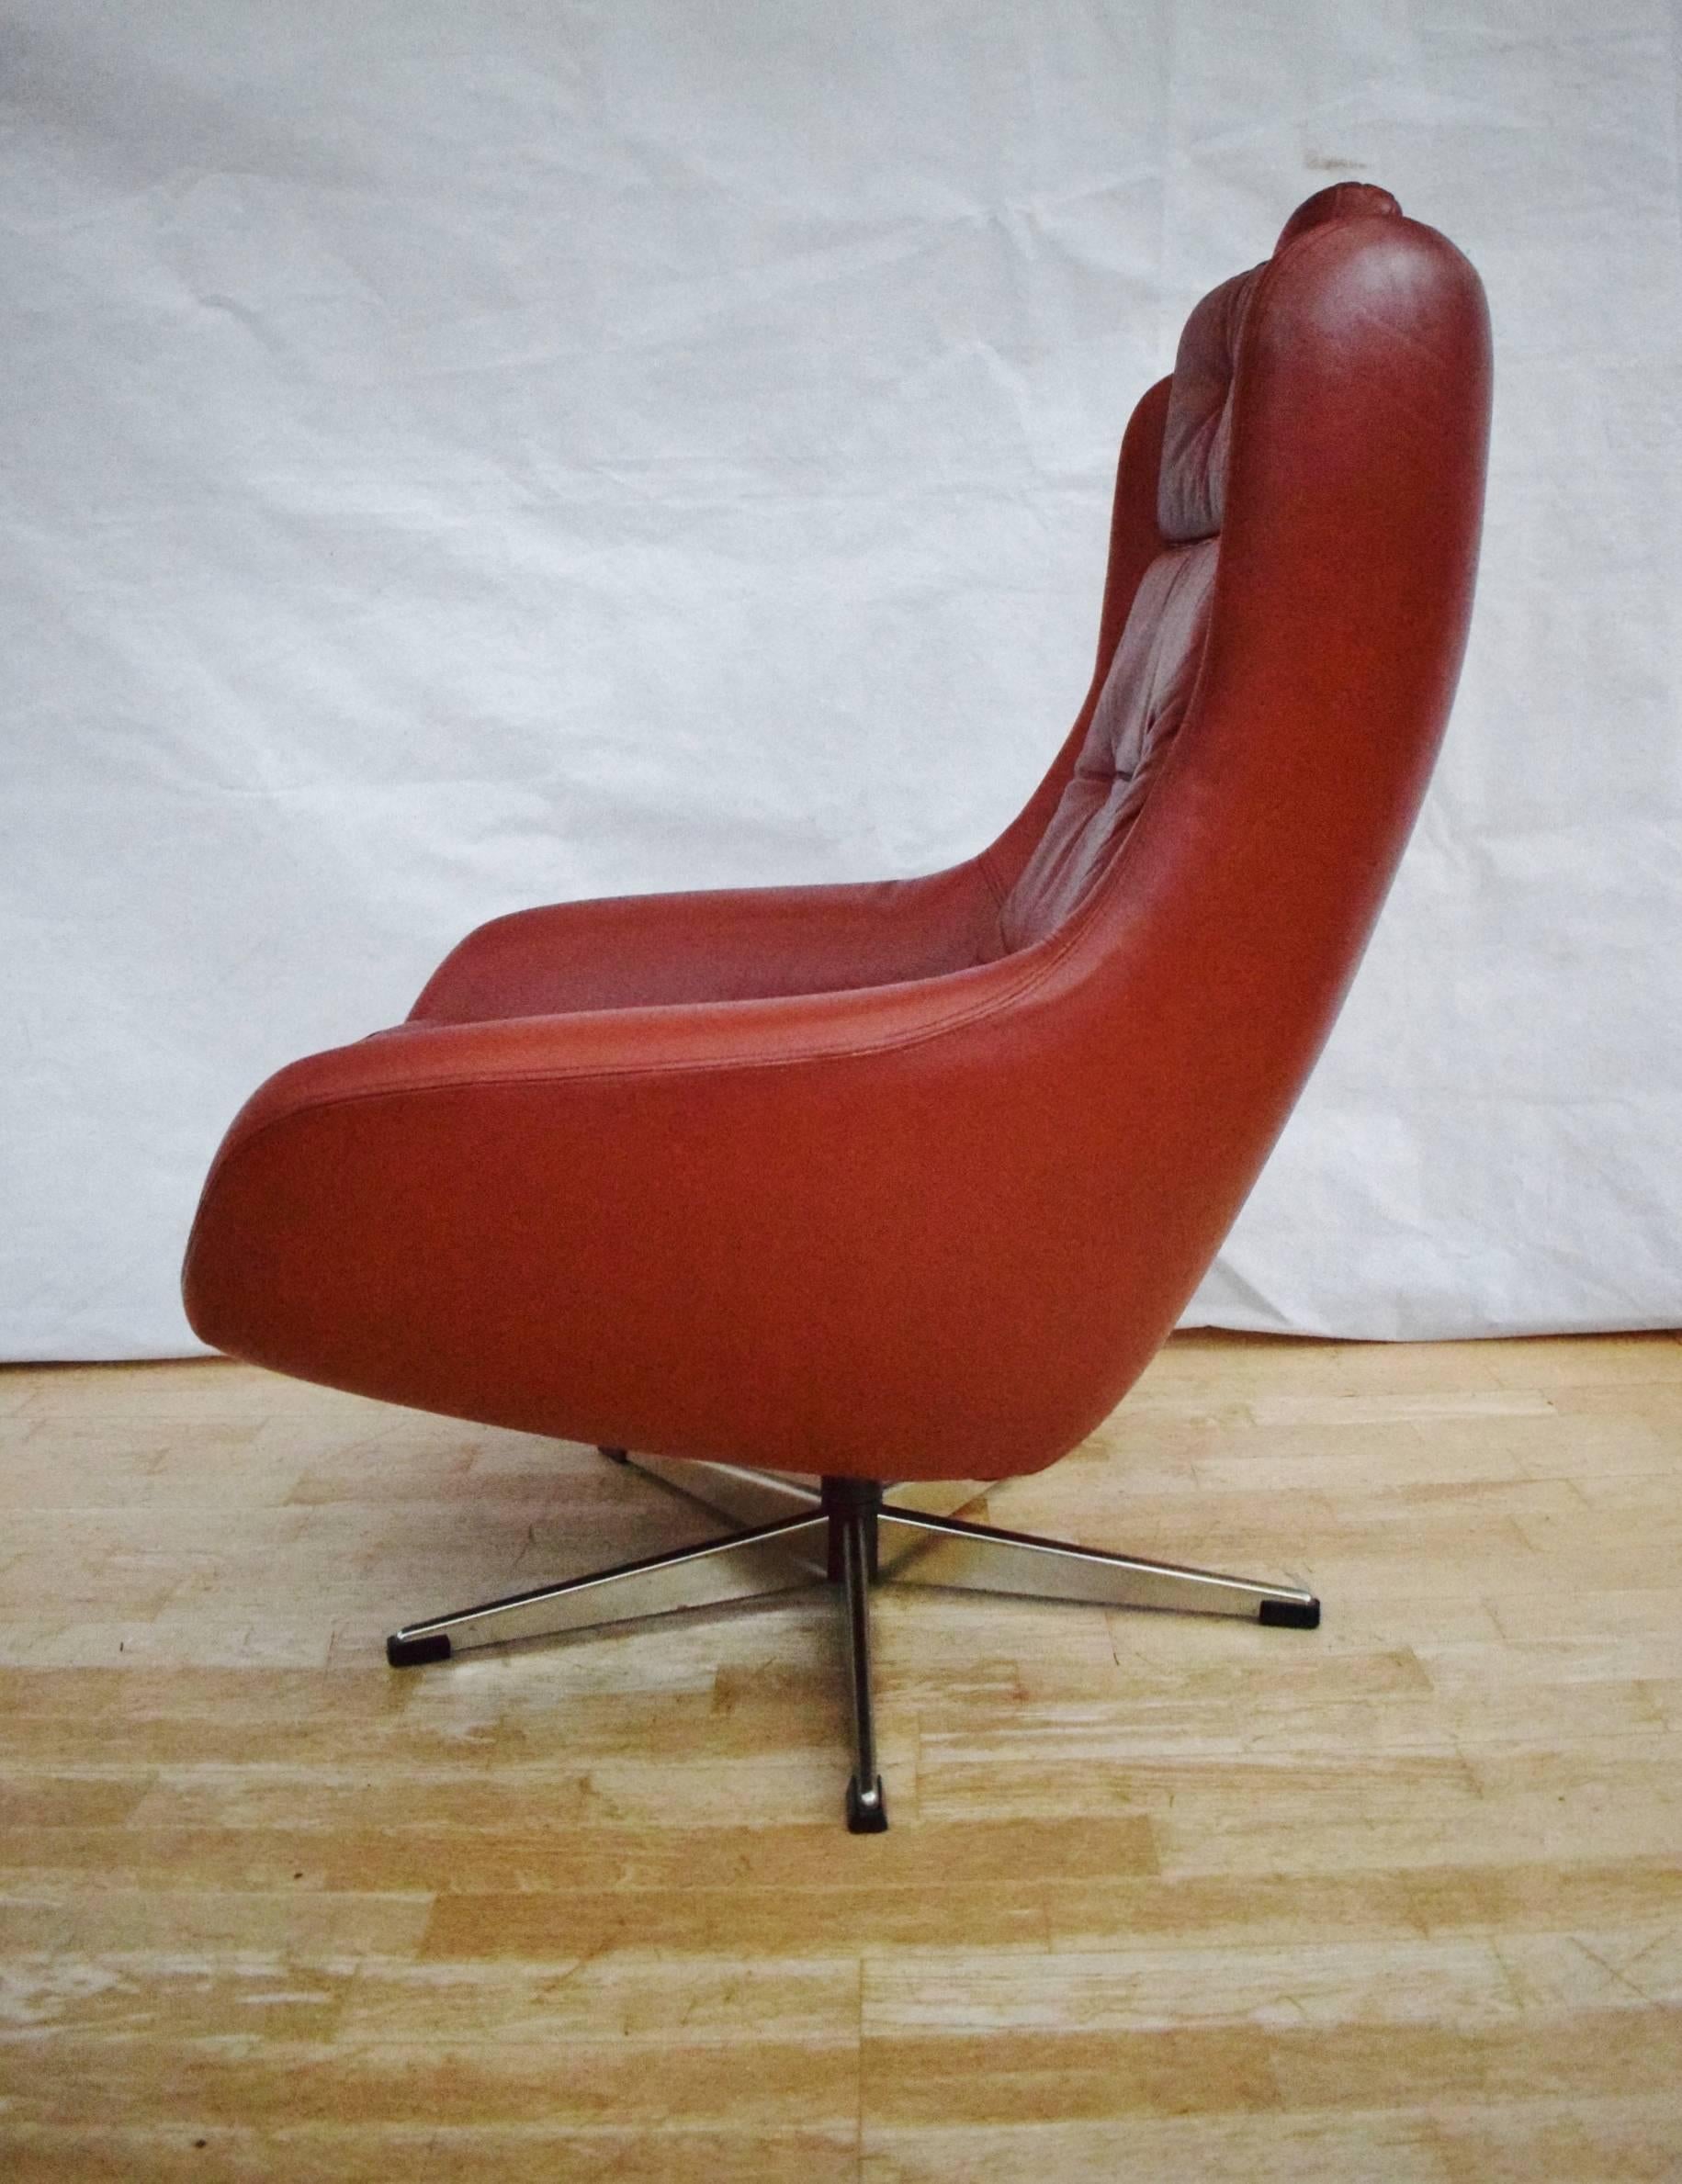 Designer: Danish Design.

Manufacturer: Unknown.

Country: Denmark.

Date: 1960s.

Material: Genuine red leather upholstery with metal swivel base.

Maximum Dimensions: Width 78cm, depth 80cm, height 96cm and seat height